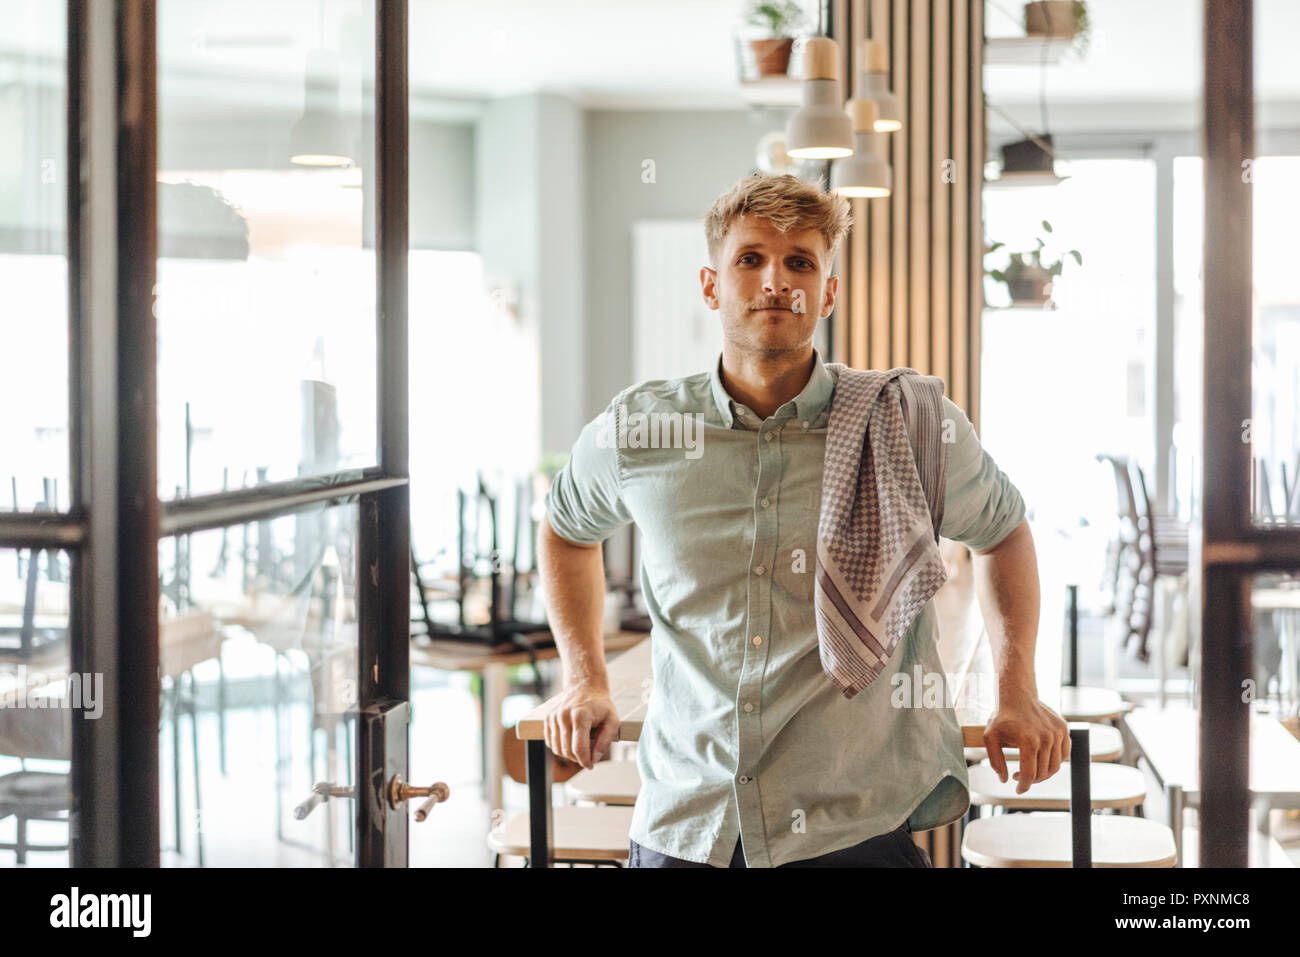 Young man working in his start-up cafe, portrait Stock Photo